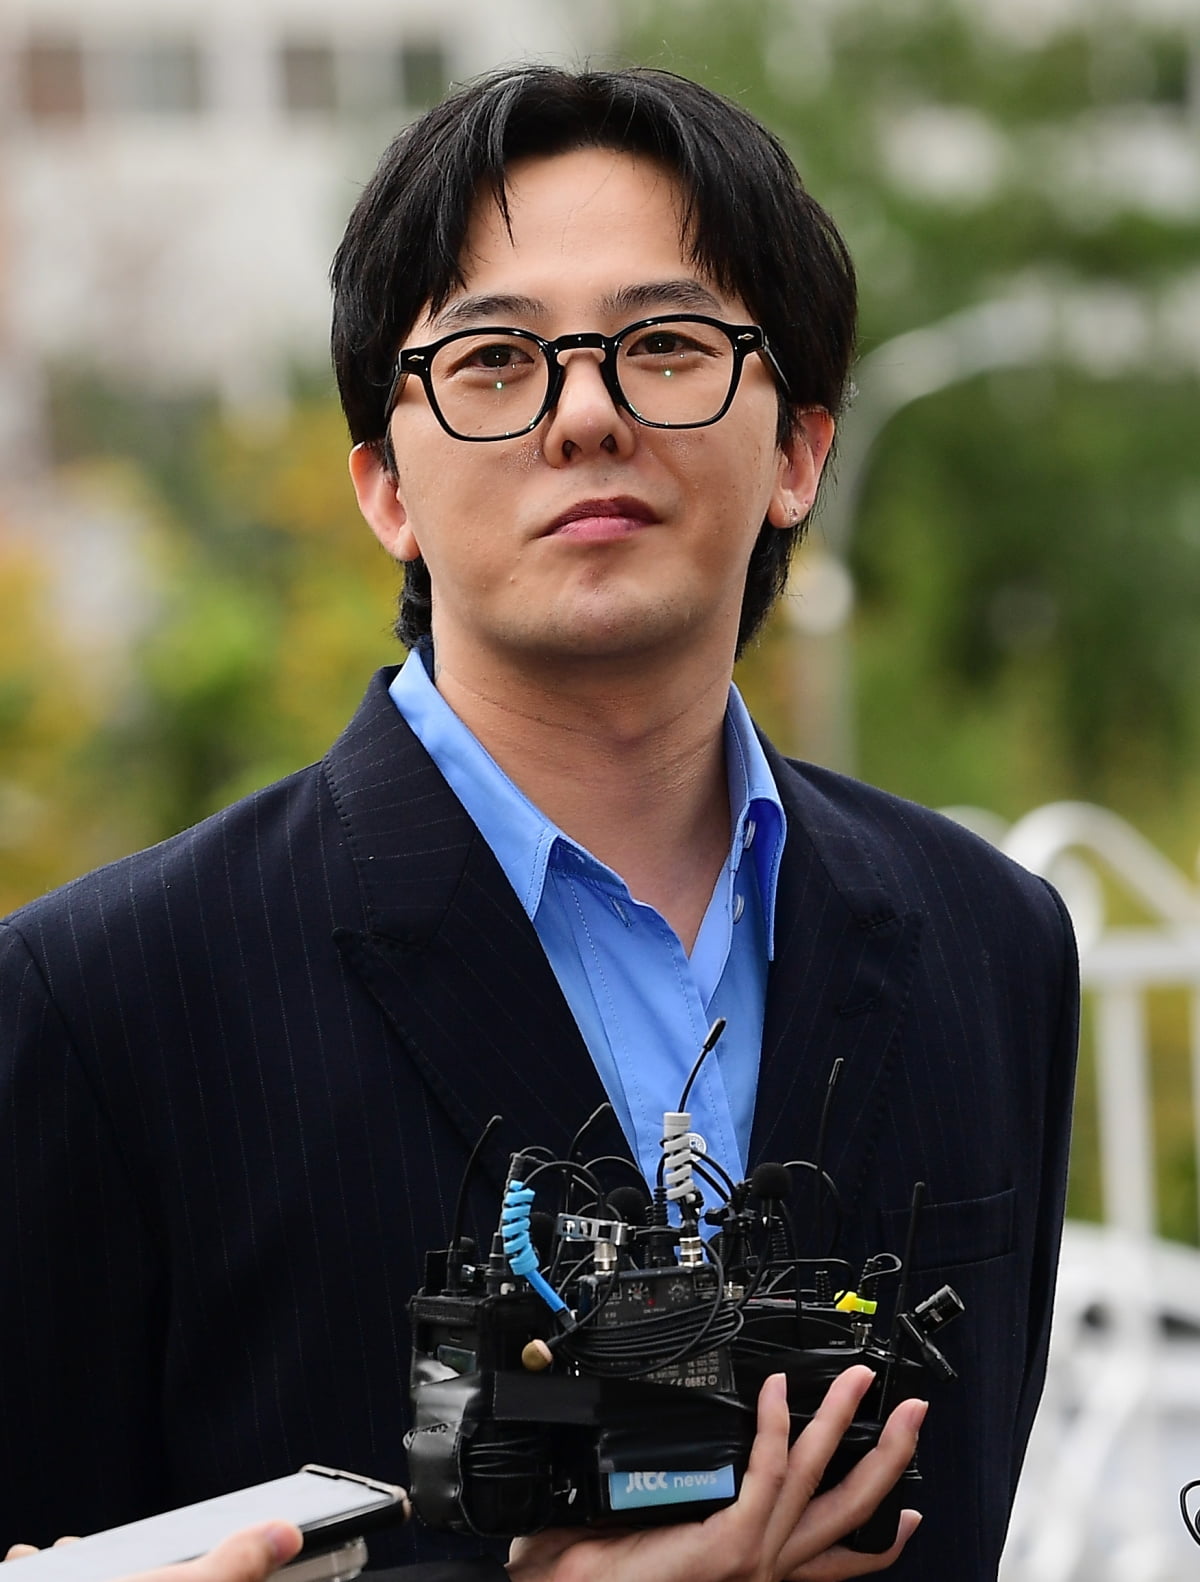 Should Lee Seon-gyun pull out his leg hair again? Police, criticism emerges from security failures to lax investigation